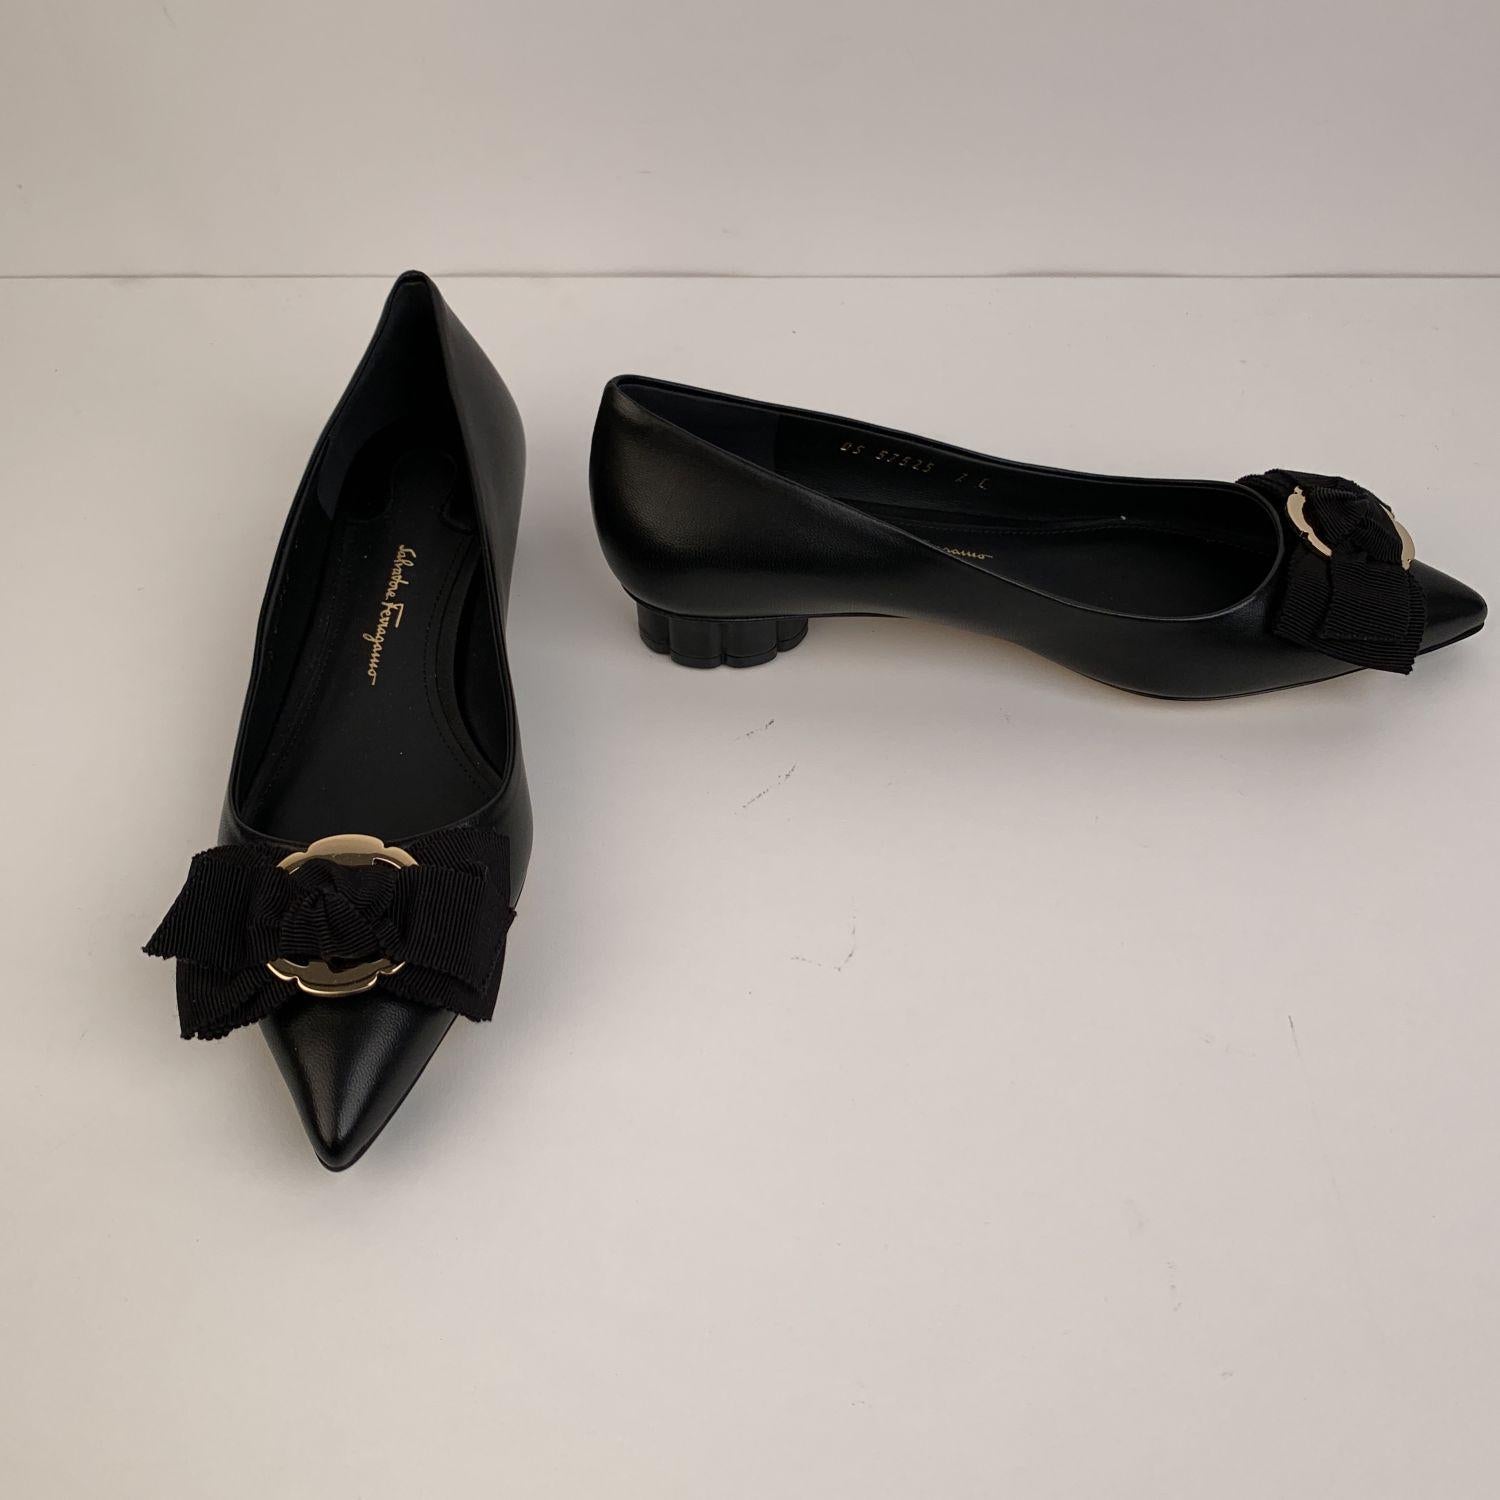 Classic Salvatore Ferragamo 'Talla 20' ballet flats. Crafted in black nappa leather. They feature a pointed toe, slip on design and a gros-grain bow on the toes. Gold metal accents. Covered flower-shaped block heels. Leather sole. Heels Height: 0.75